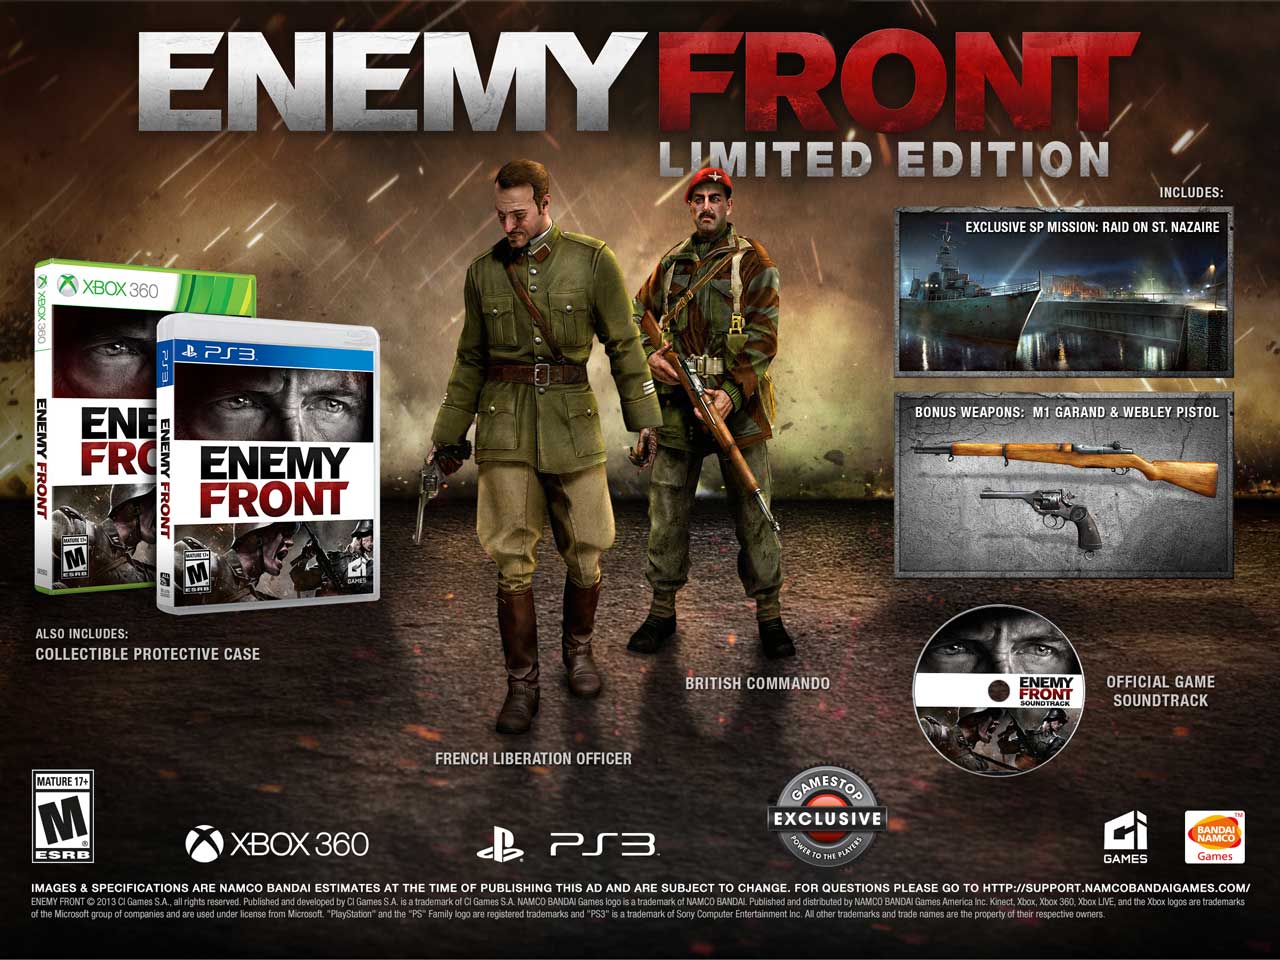 Image for Enemy Front limited edition includes exclusive content